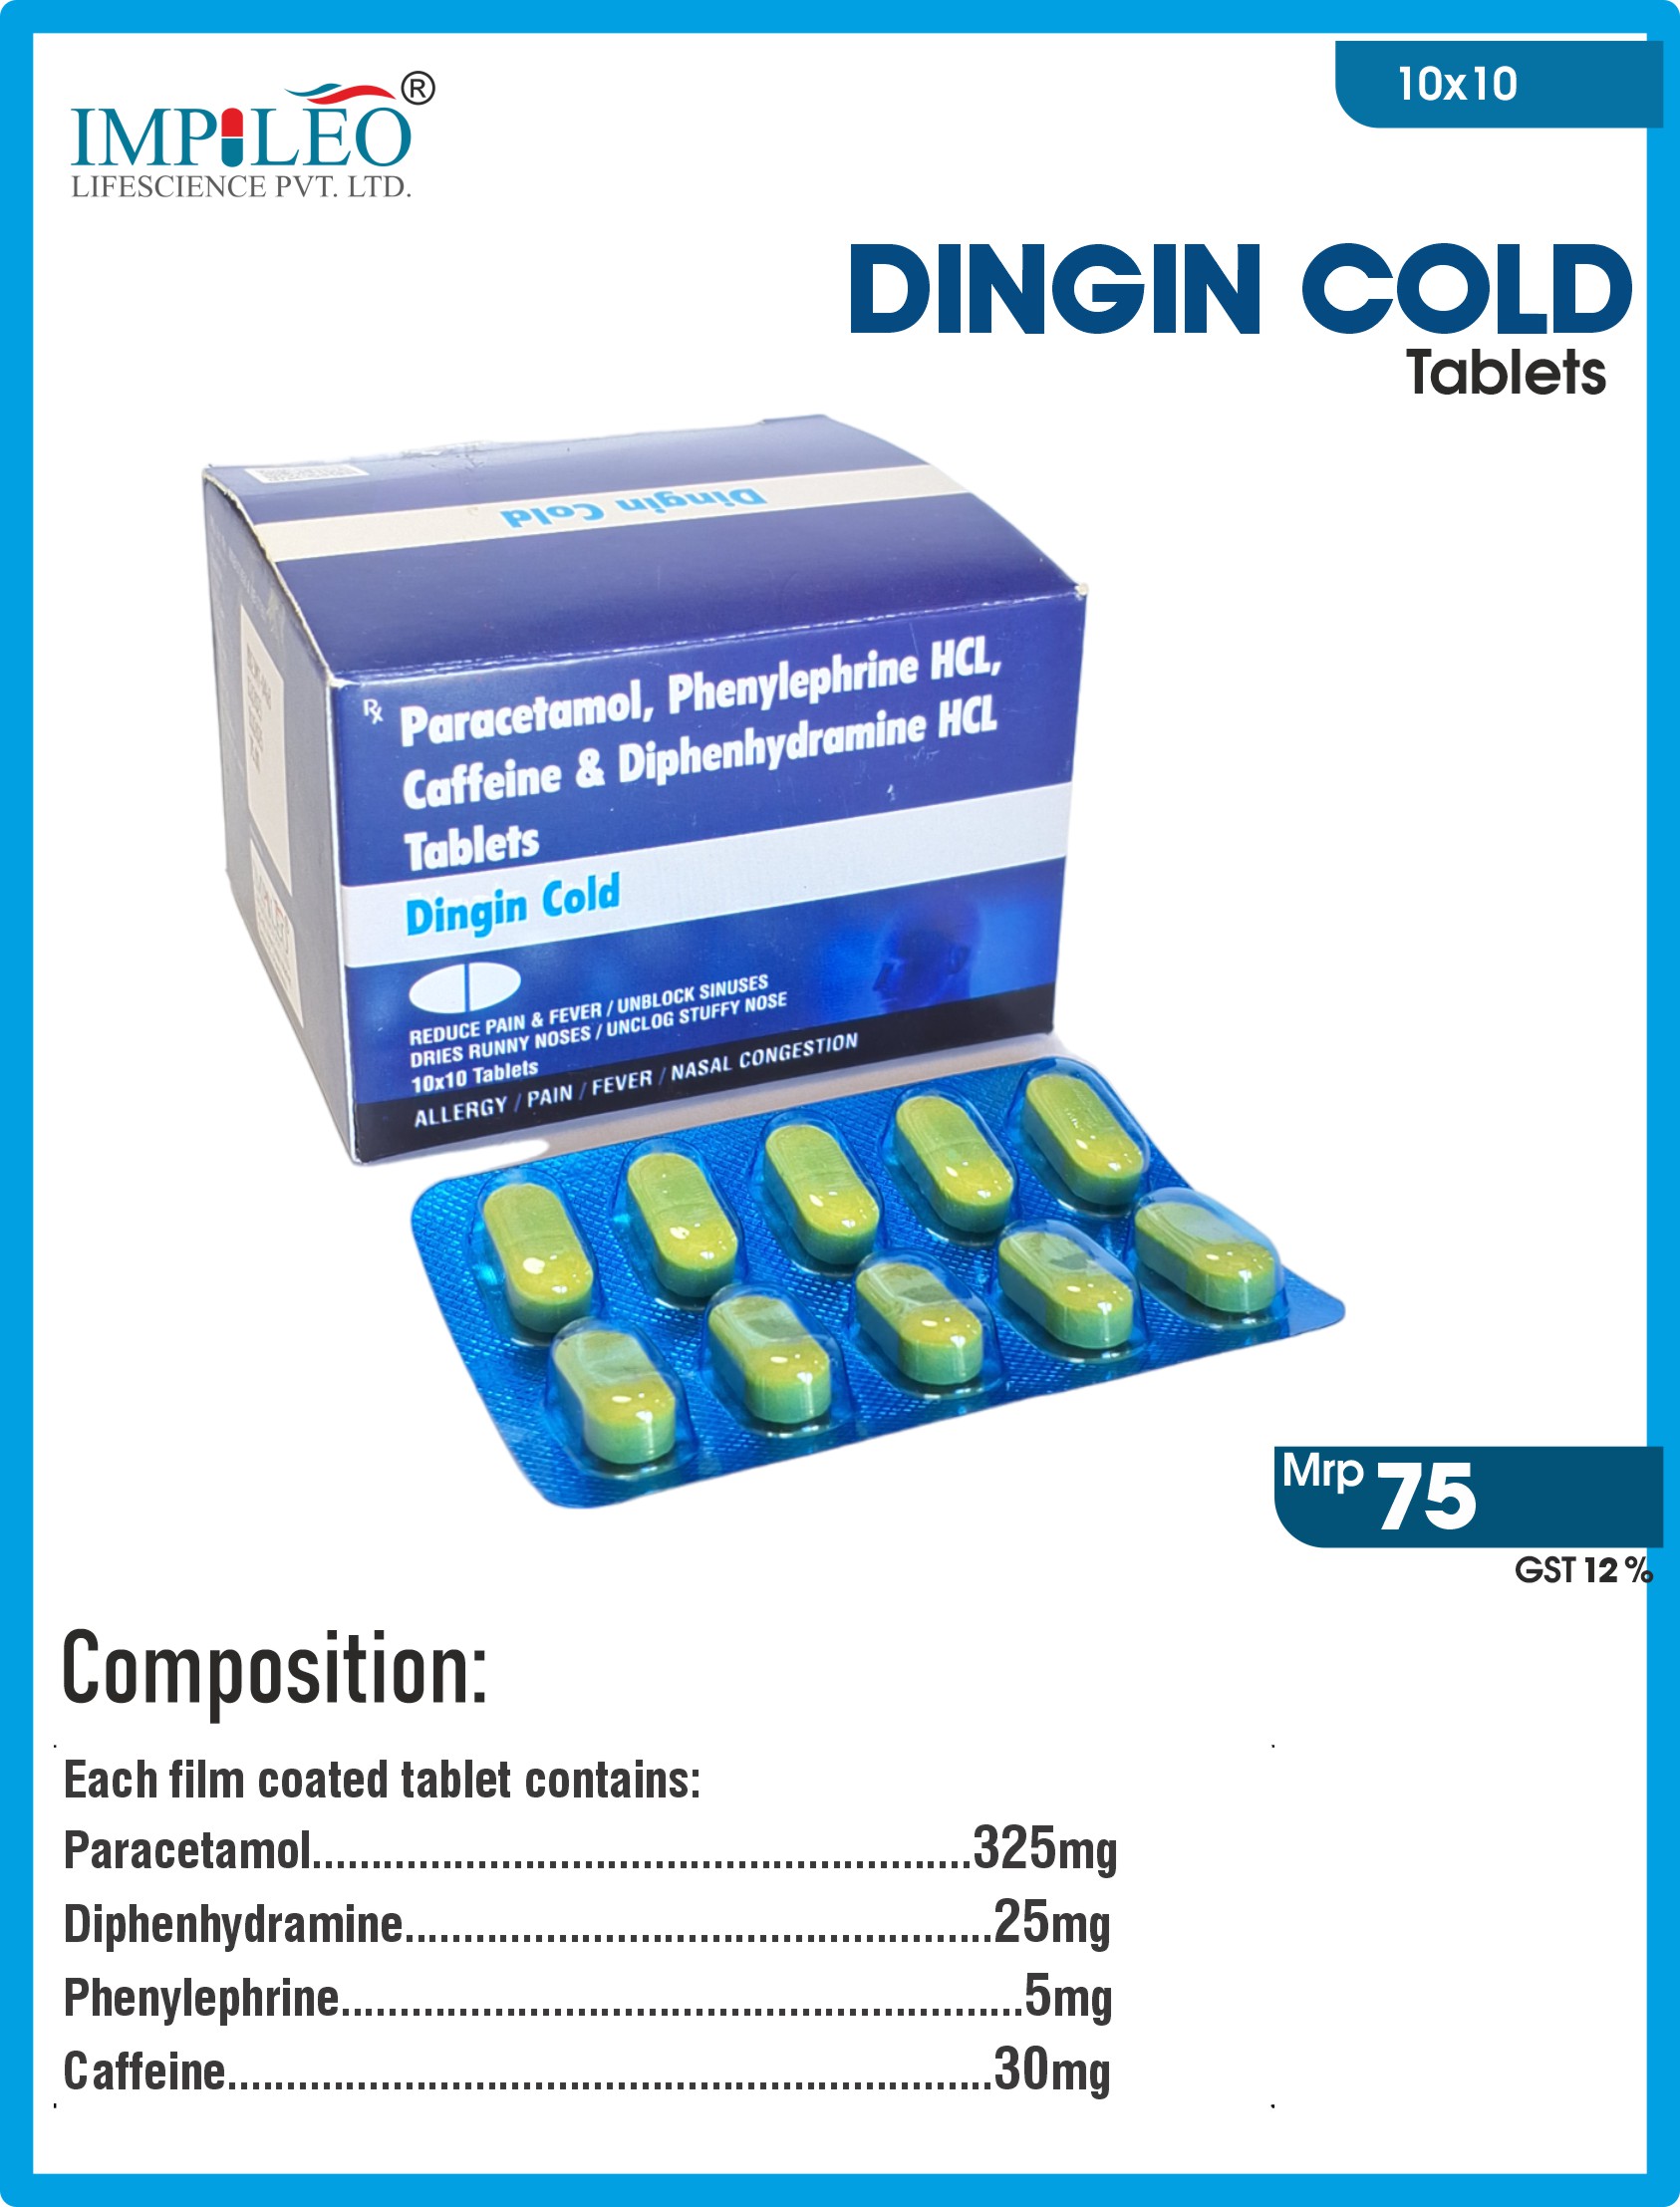 Discover Peak Wellness: Introducing Premium DINGIN-COLD Tablets (Paracetamol, Diphenhydramine, Phenylephrine & Caffeine) Crafted by Third-Party Manufacturing in Chandigarh